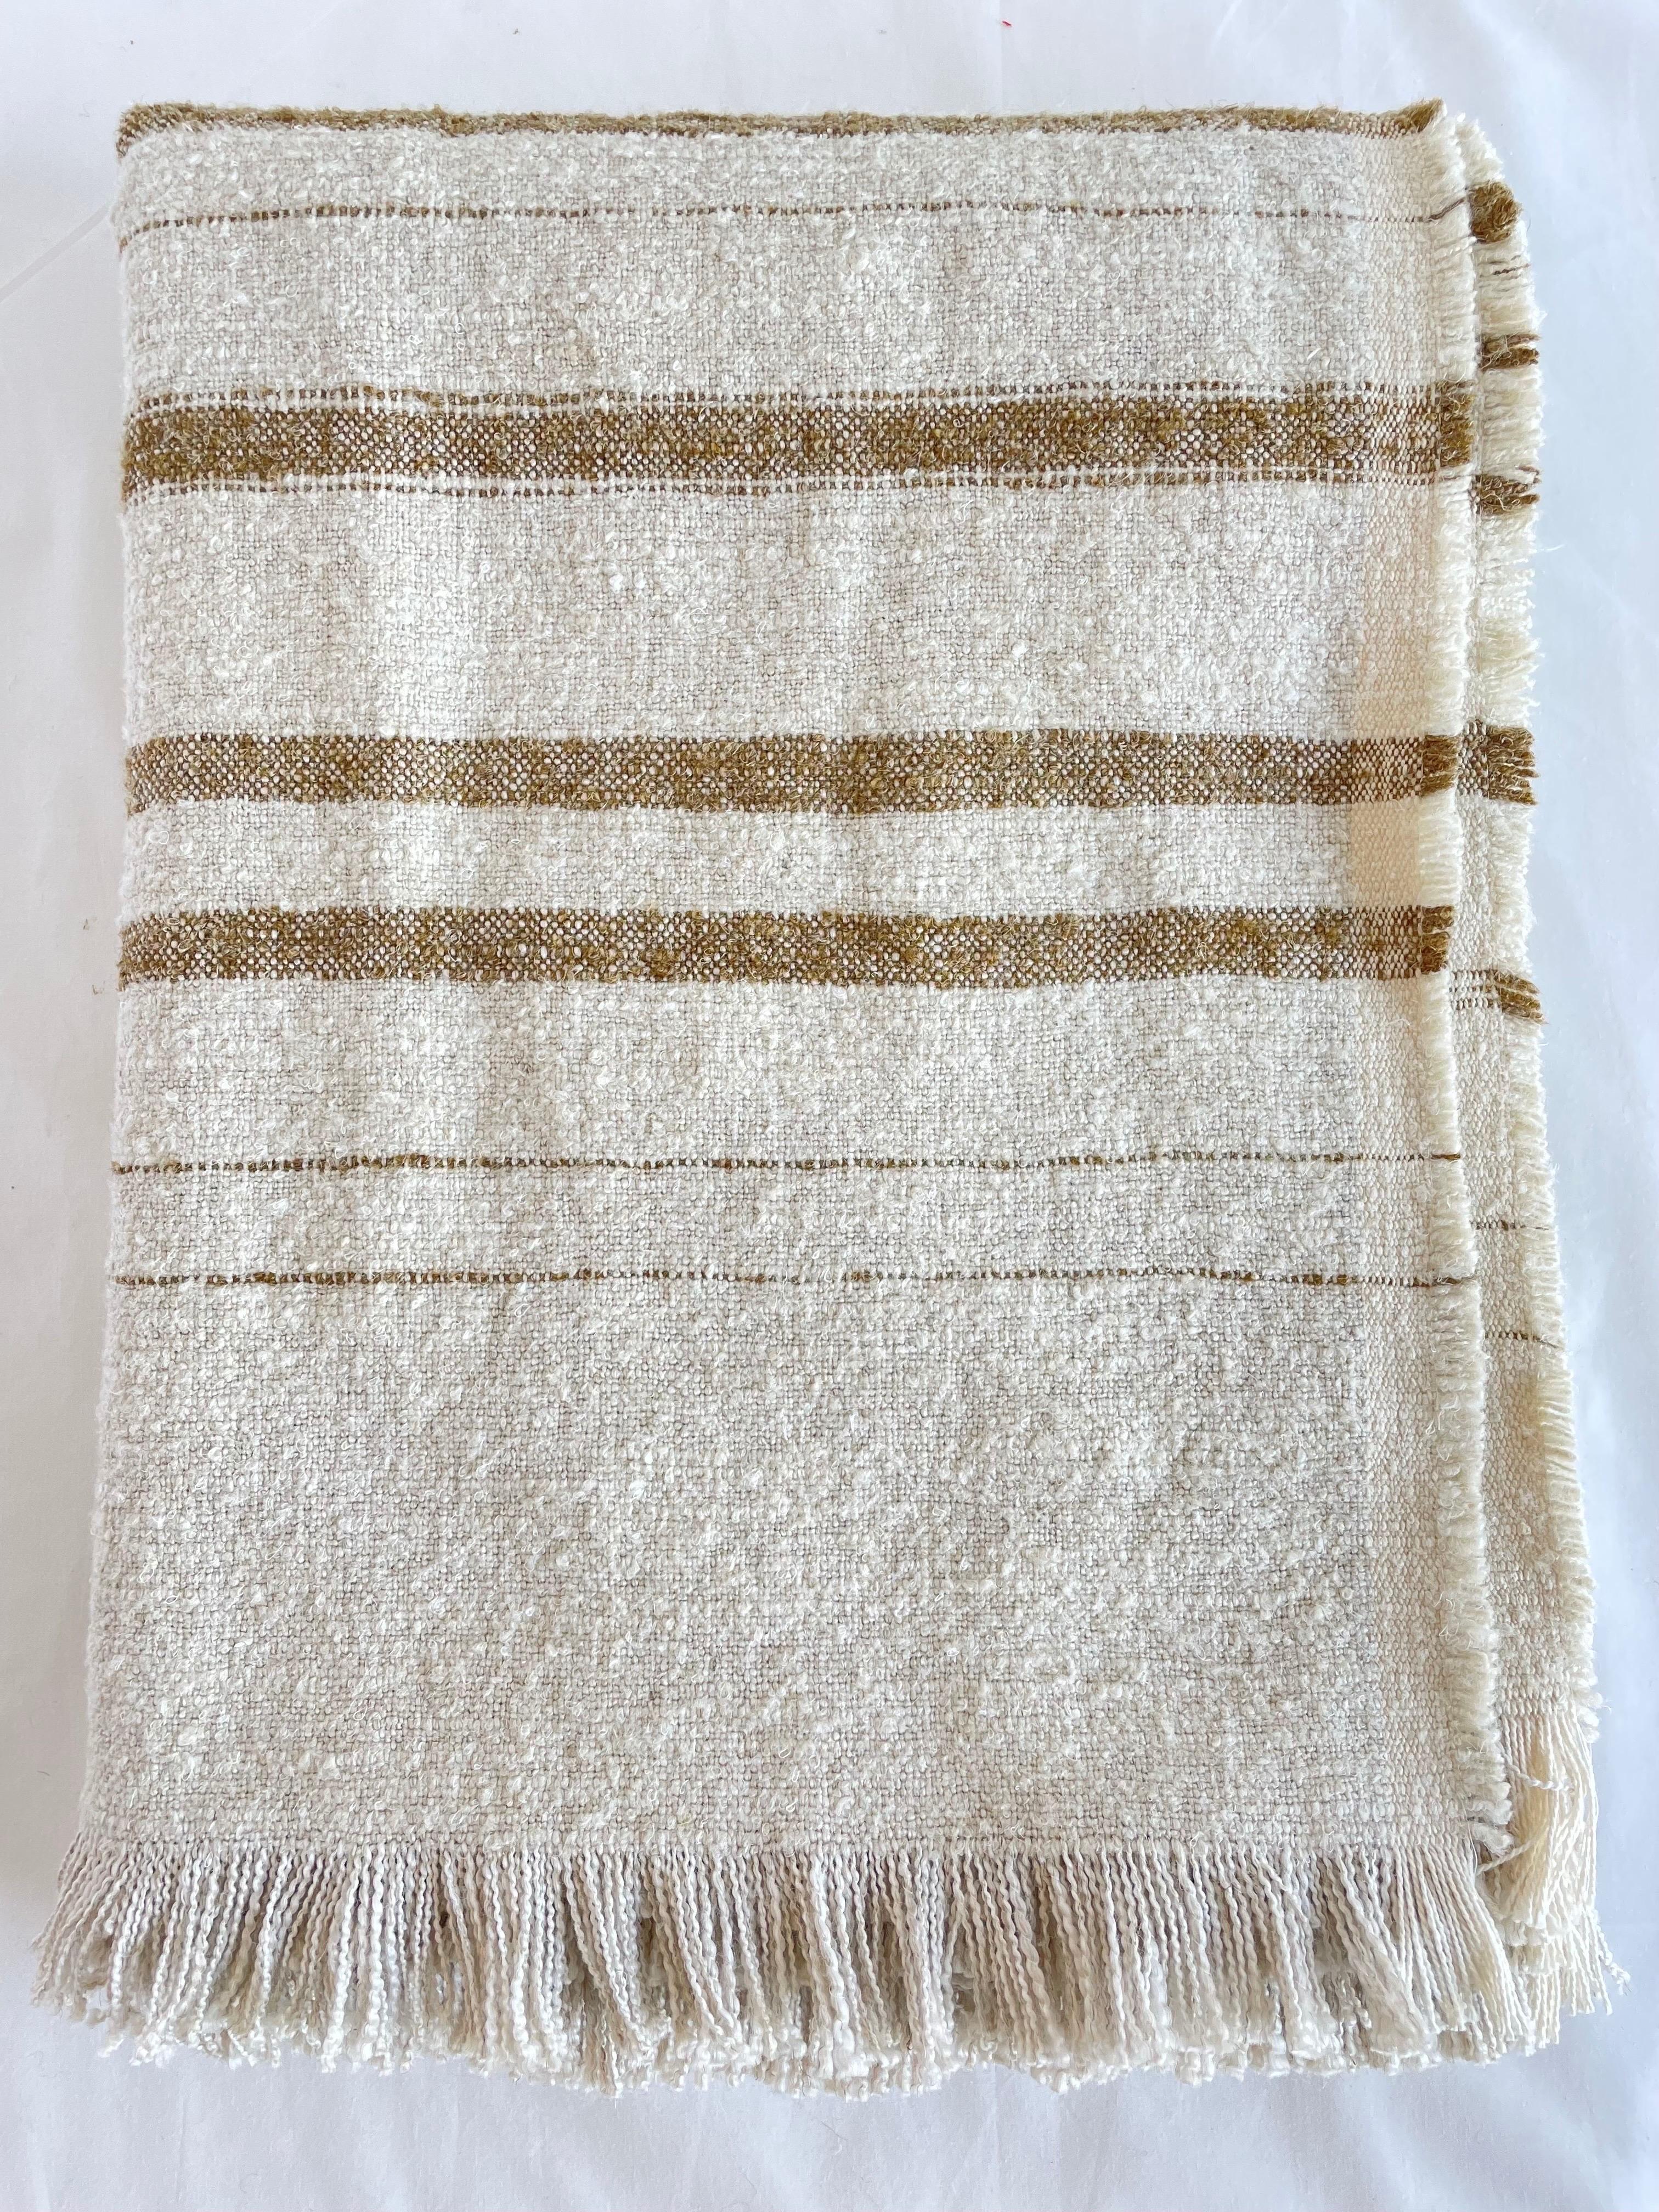 Woven in Belgium using traditional weaving techniques, Bloom Home Inc's Natalie throw features a Belgian Linen warp and alternating Belgian Linen/Mixed Fiber weft. The alternating wefts create a stripe that plays with both texture and